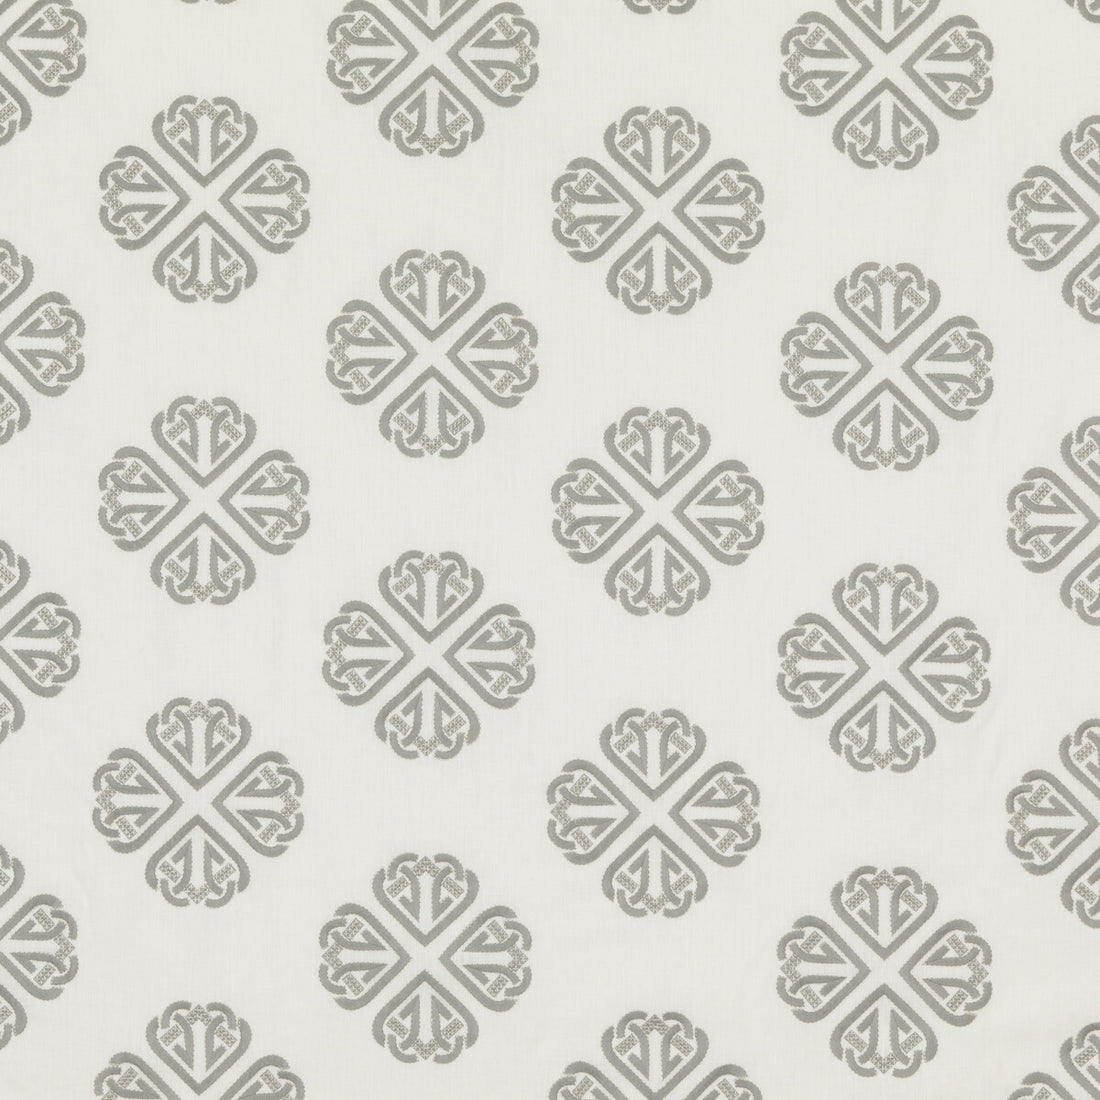 Kersloe fabric in soft grey color - pattern BF10768.4.0 - by G P &amp; J Baker in the Keswick Embroideries collection